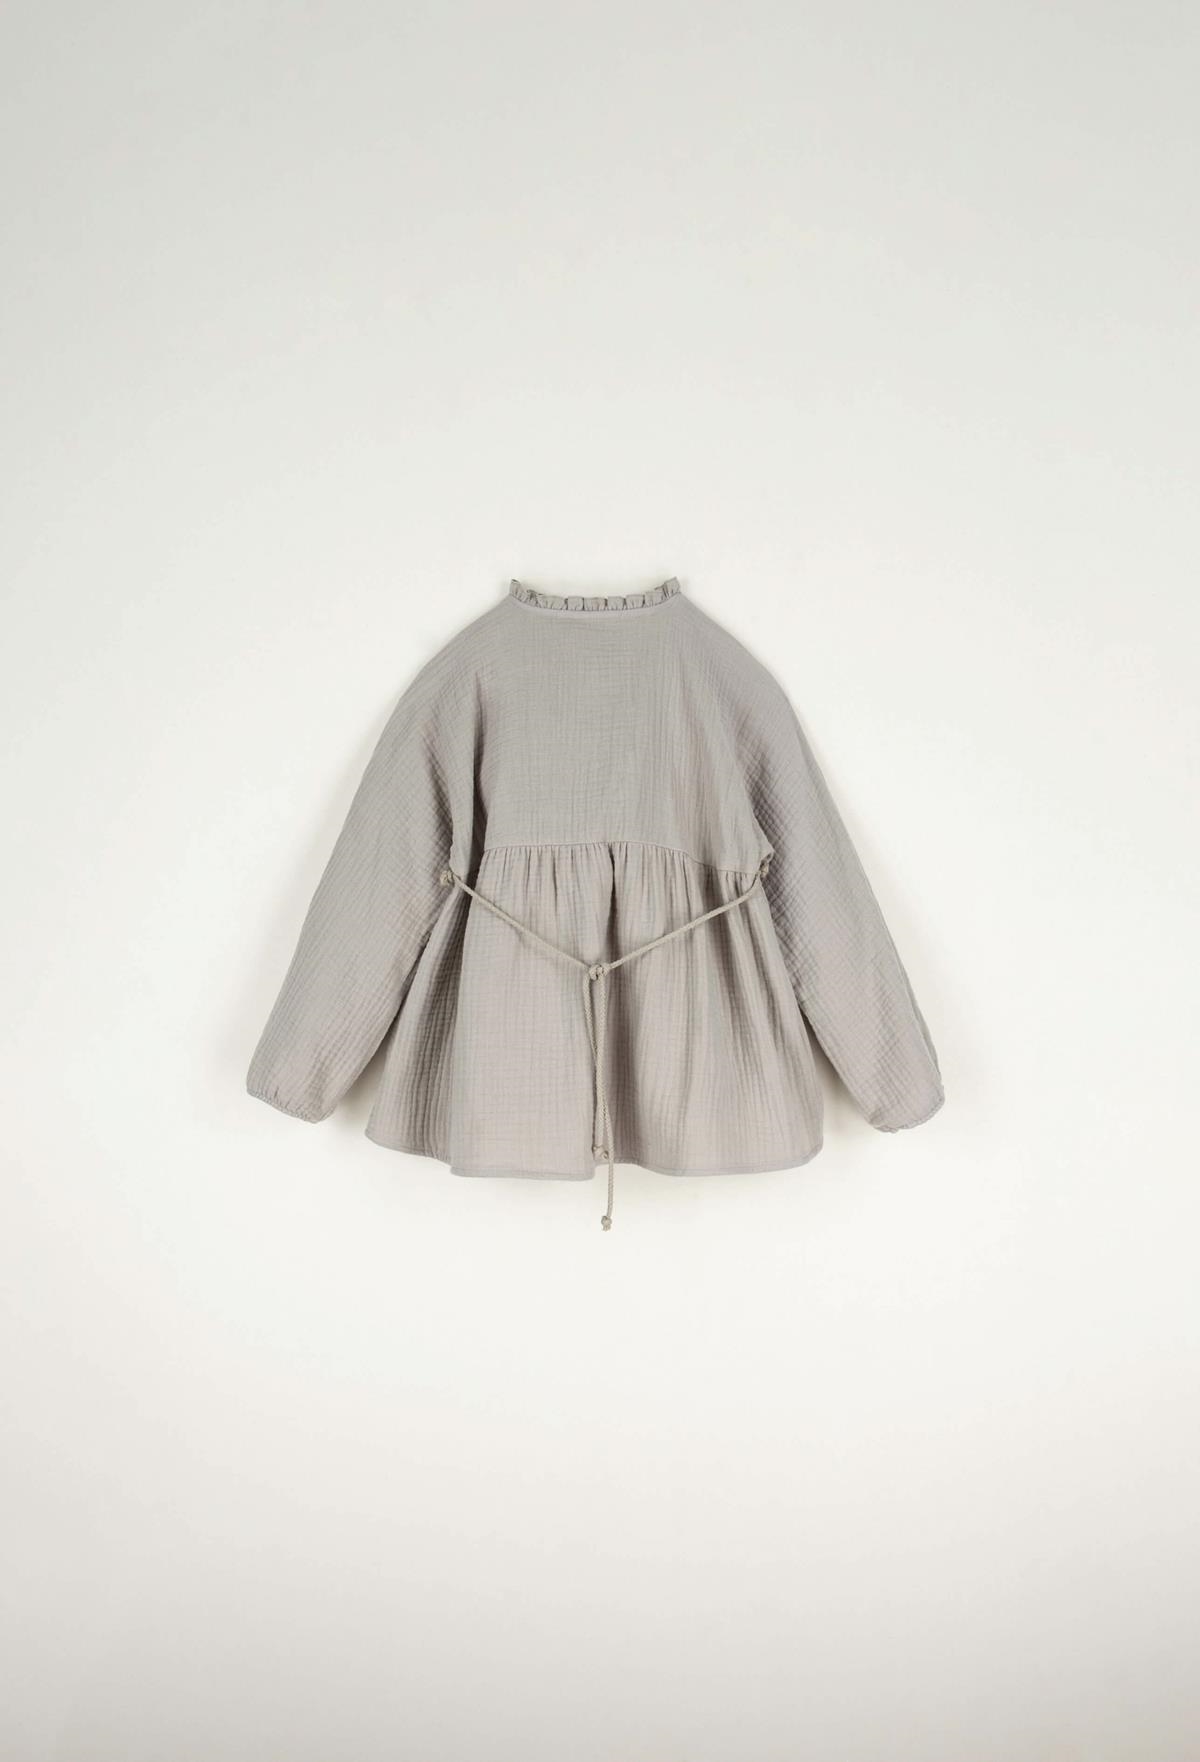 Mod.14.1 Taupe blouse with yoke and Swiss embroidery | AW22.23 Mod.14.1 Taupe blouse with yoke and Swiss embroidery